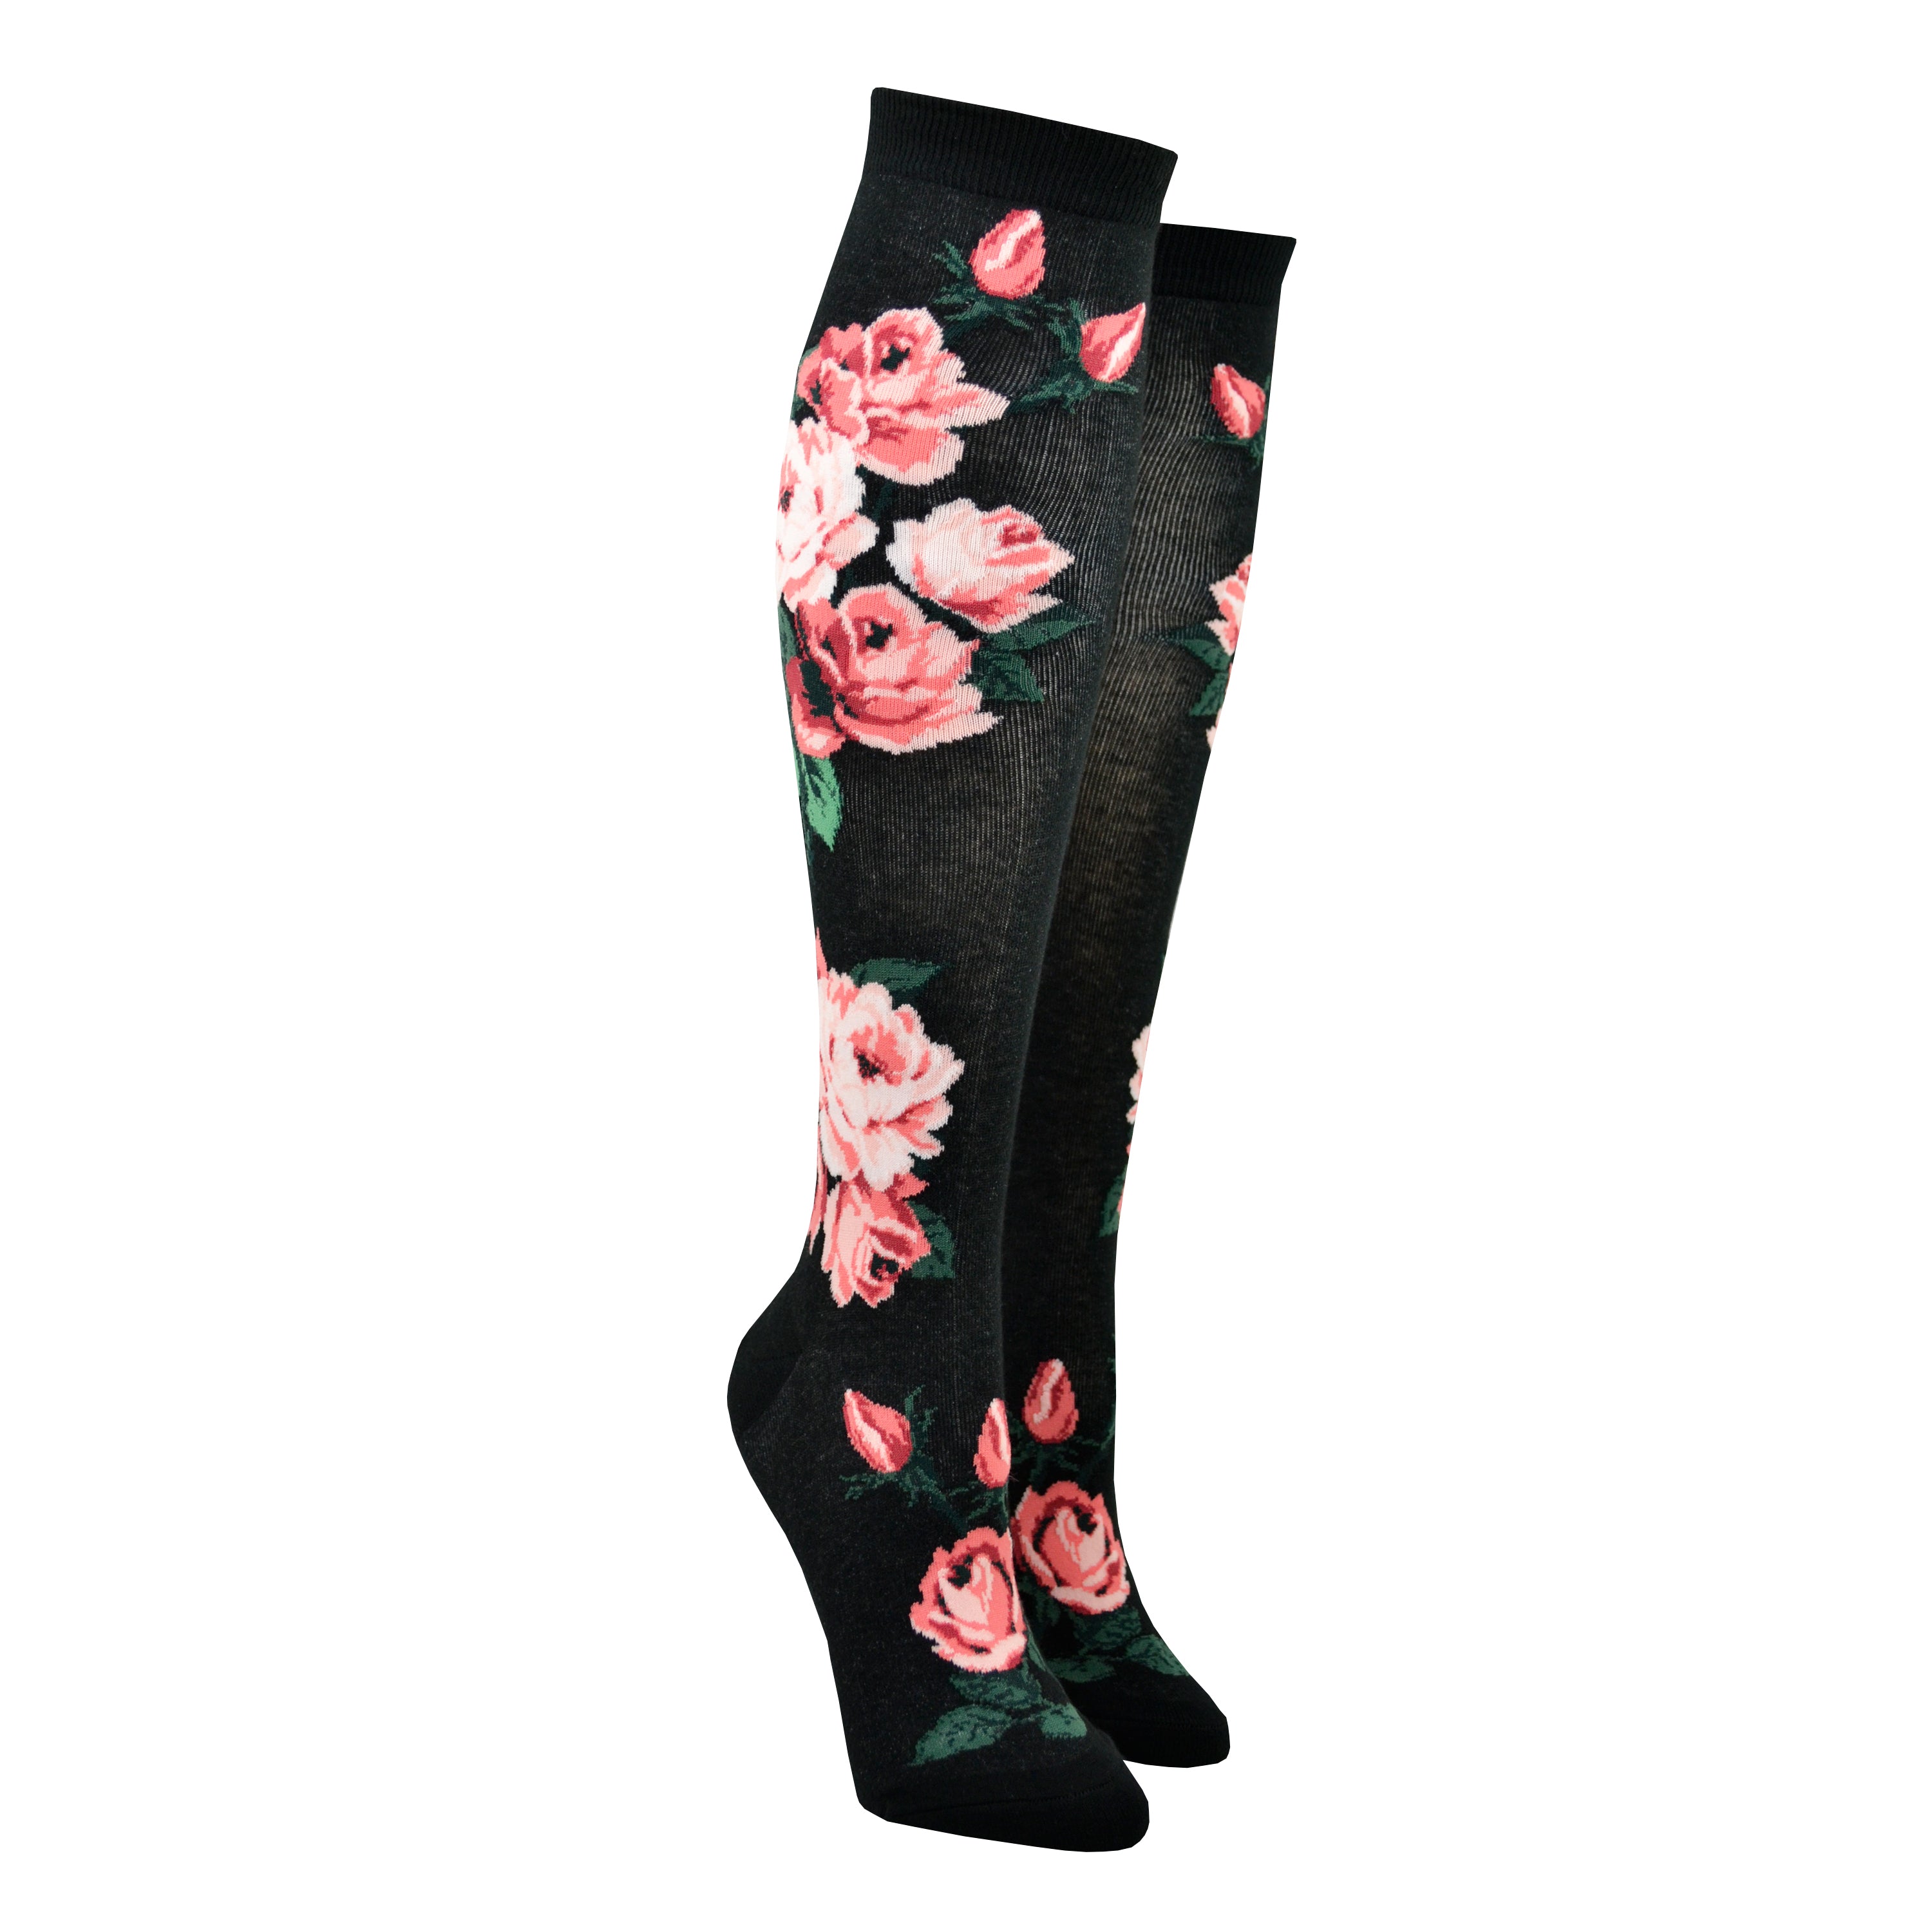 A pair of women's cotton knee high socks by Modsock feature bright pink roses on a black background and are shown on a mannequin leg form.